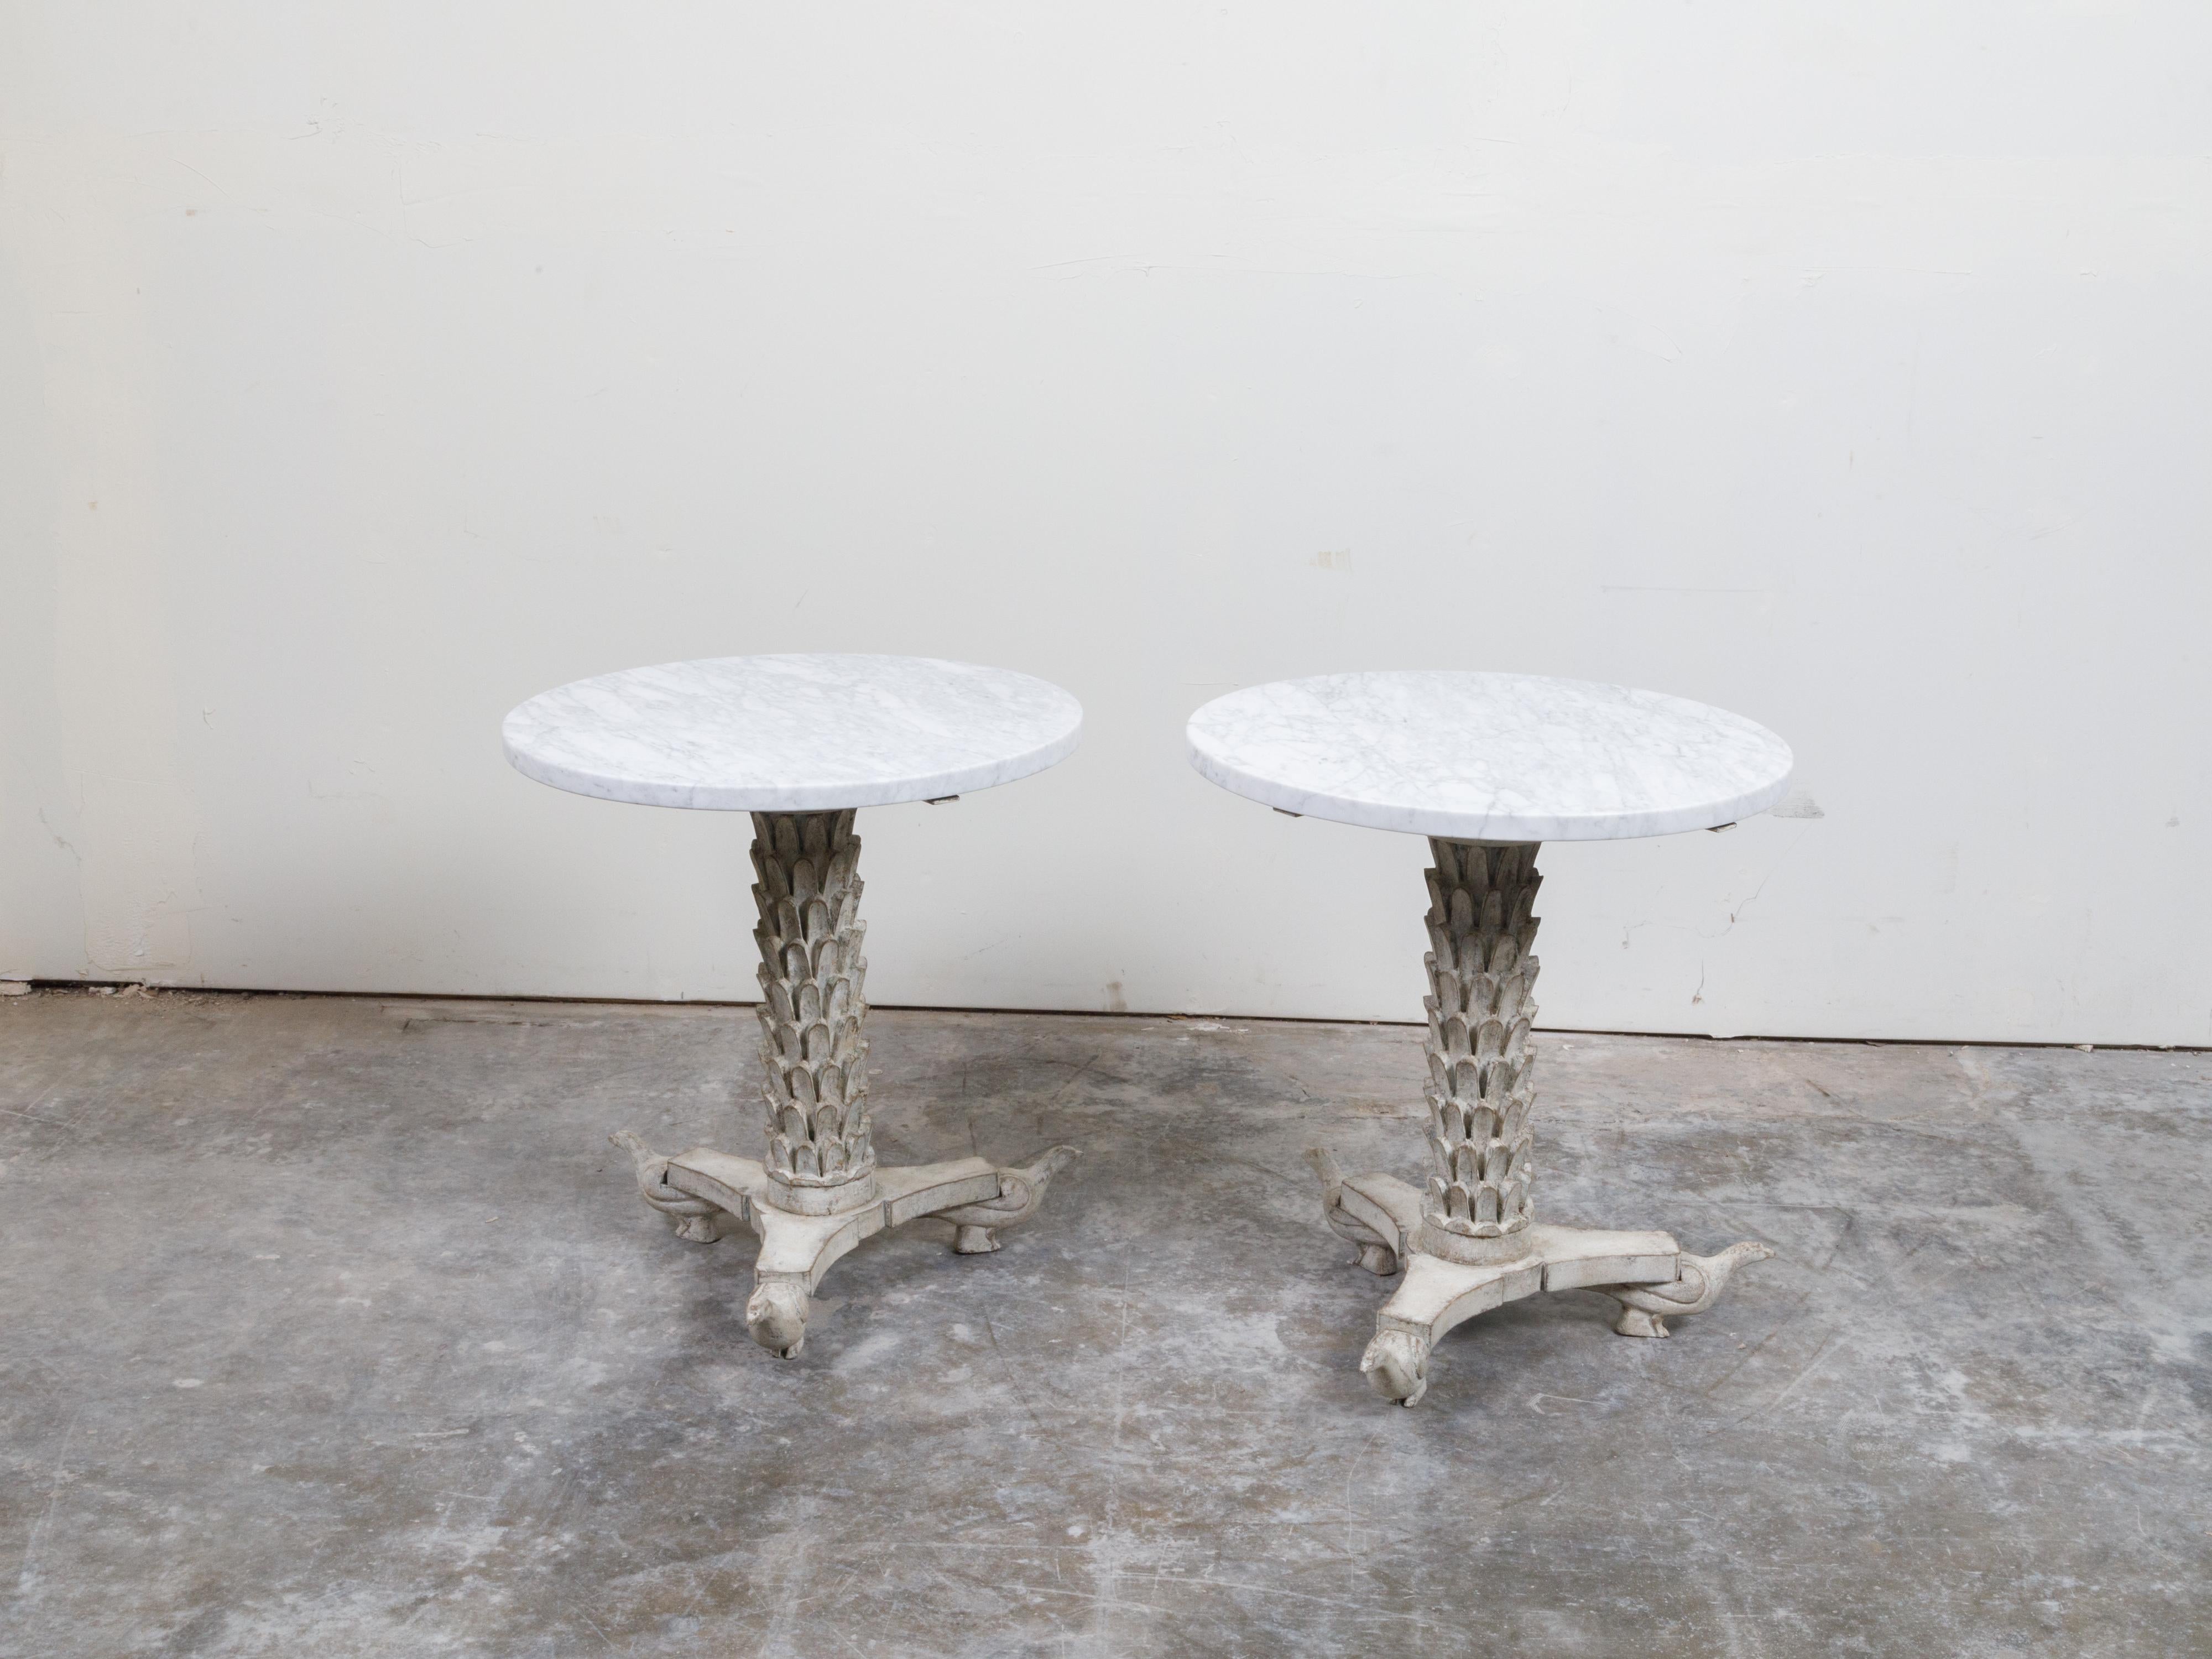 A pair of Italian carved wooden side tables from the mid 20th century, with round white marble tops, carved palm tree bases and birds. Created in Italy during the midcentury period, each of this pair of side tables features a white marble top